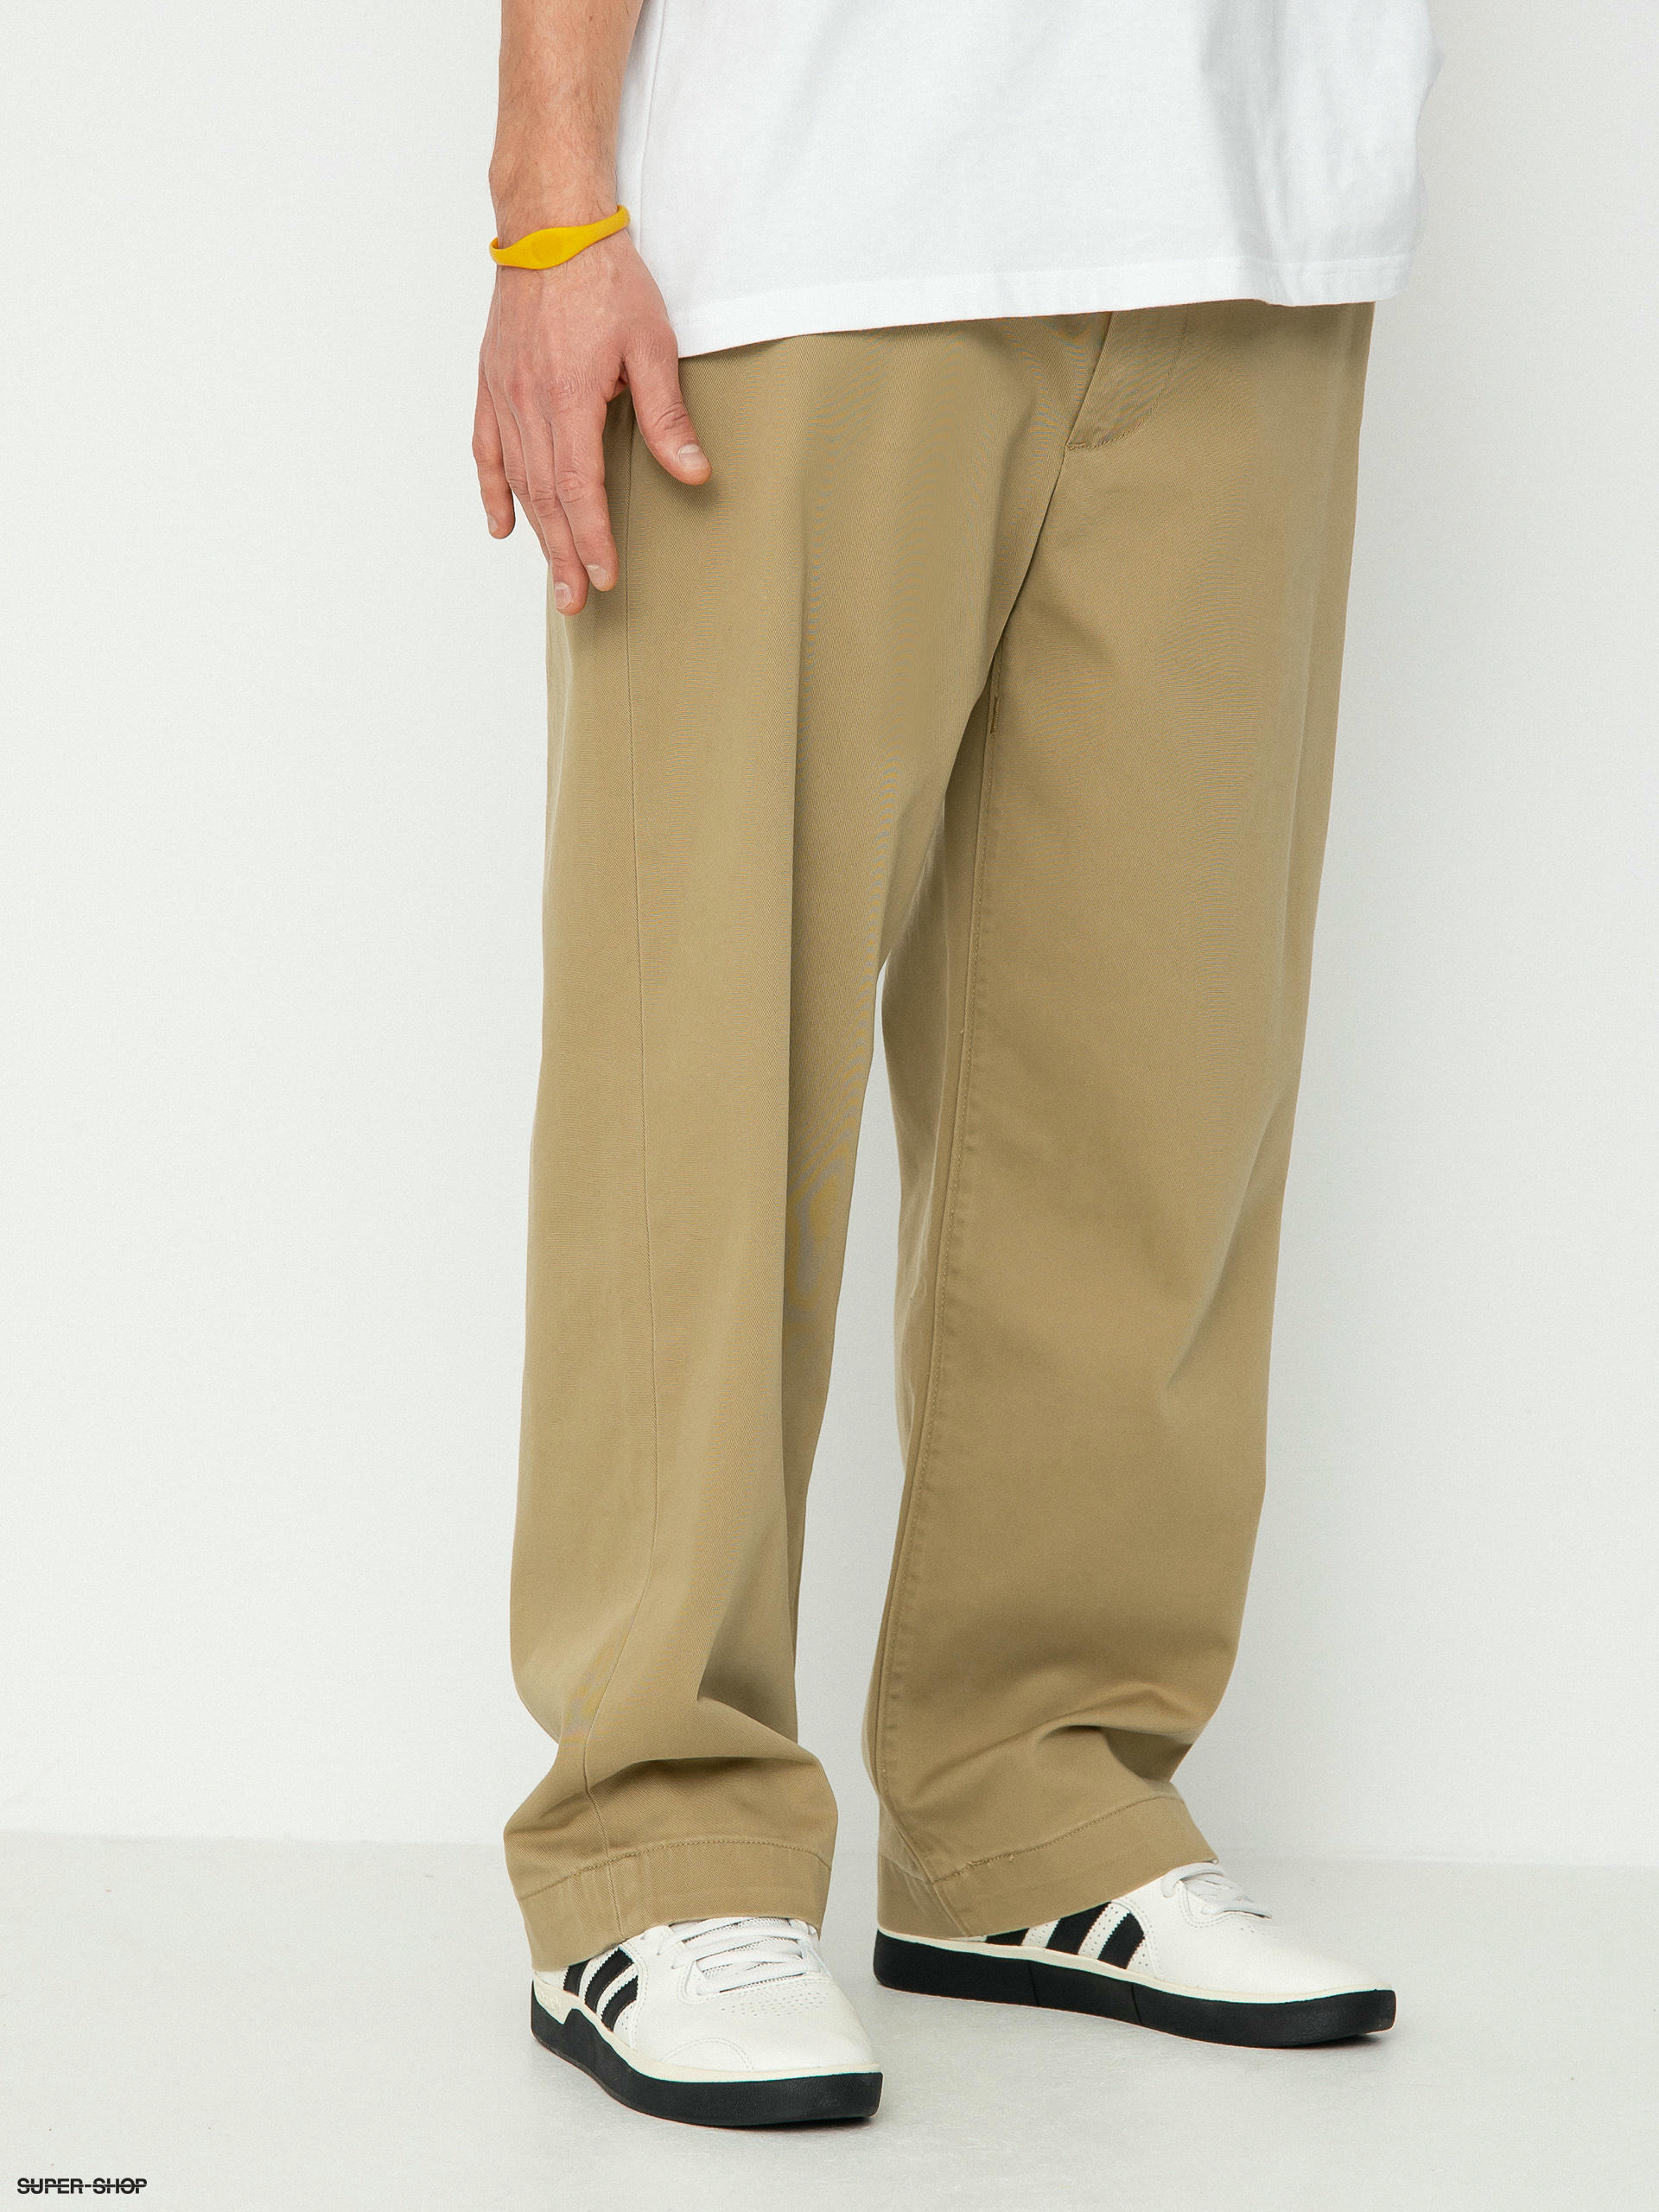 Levis Skate Loose Chino Pant  SE Harvest Gold  Urban Industry